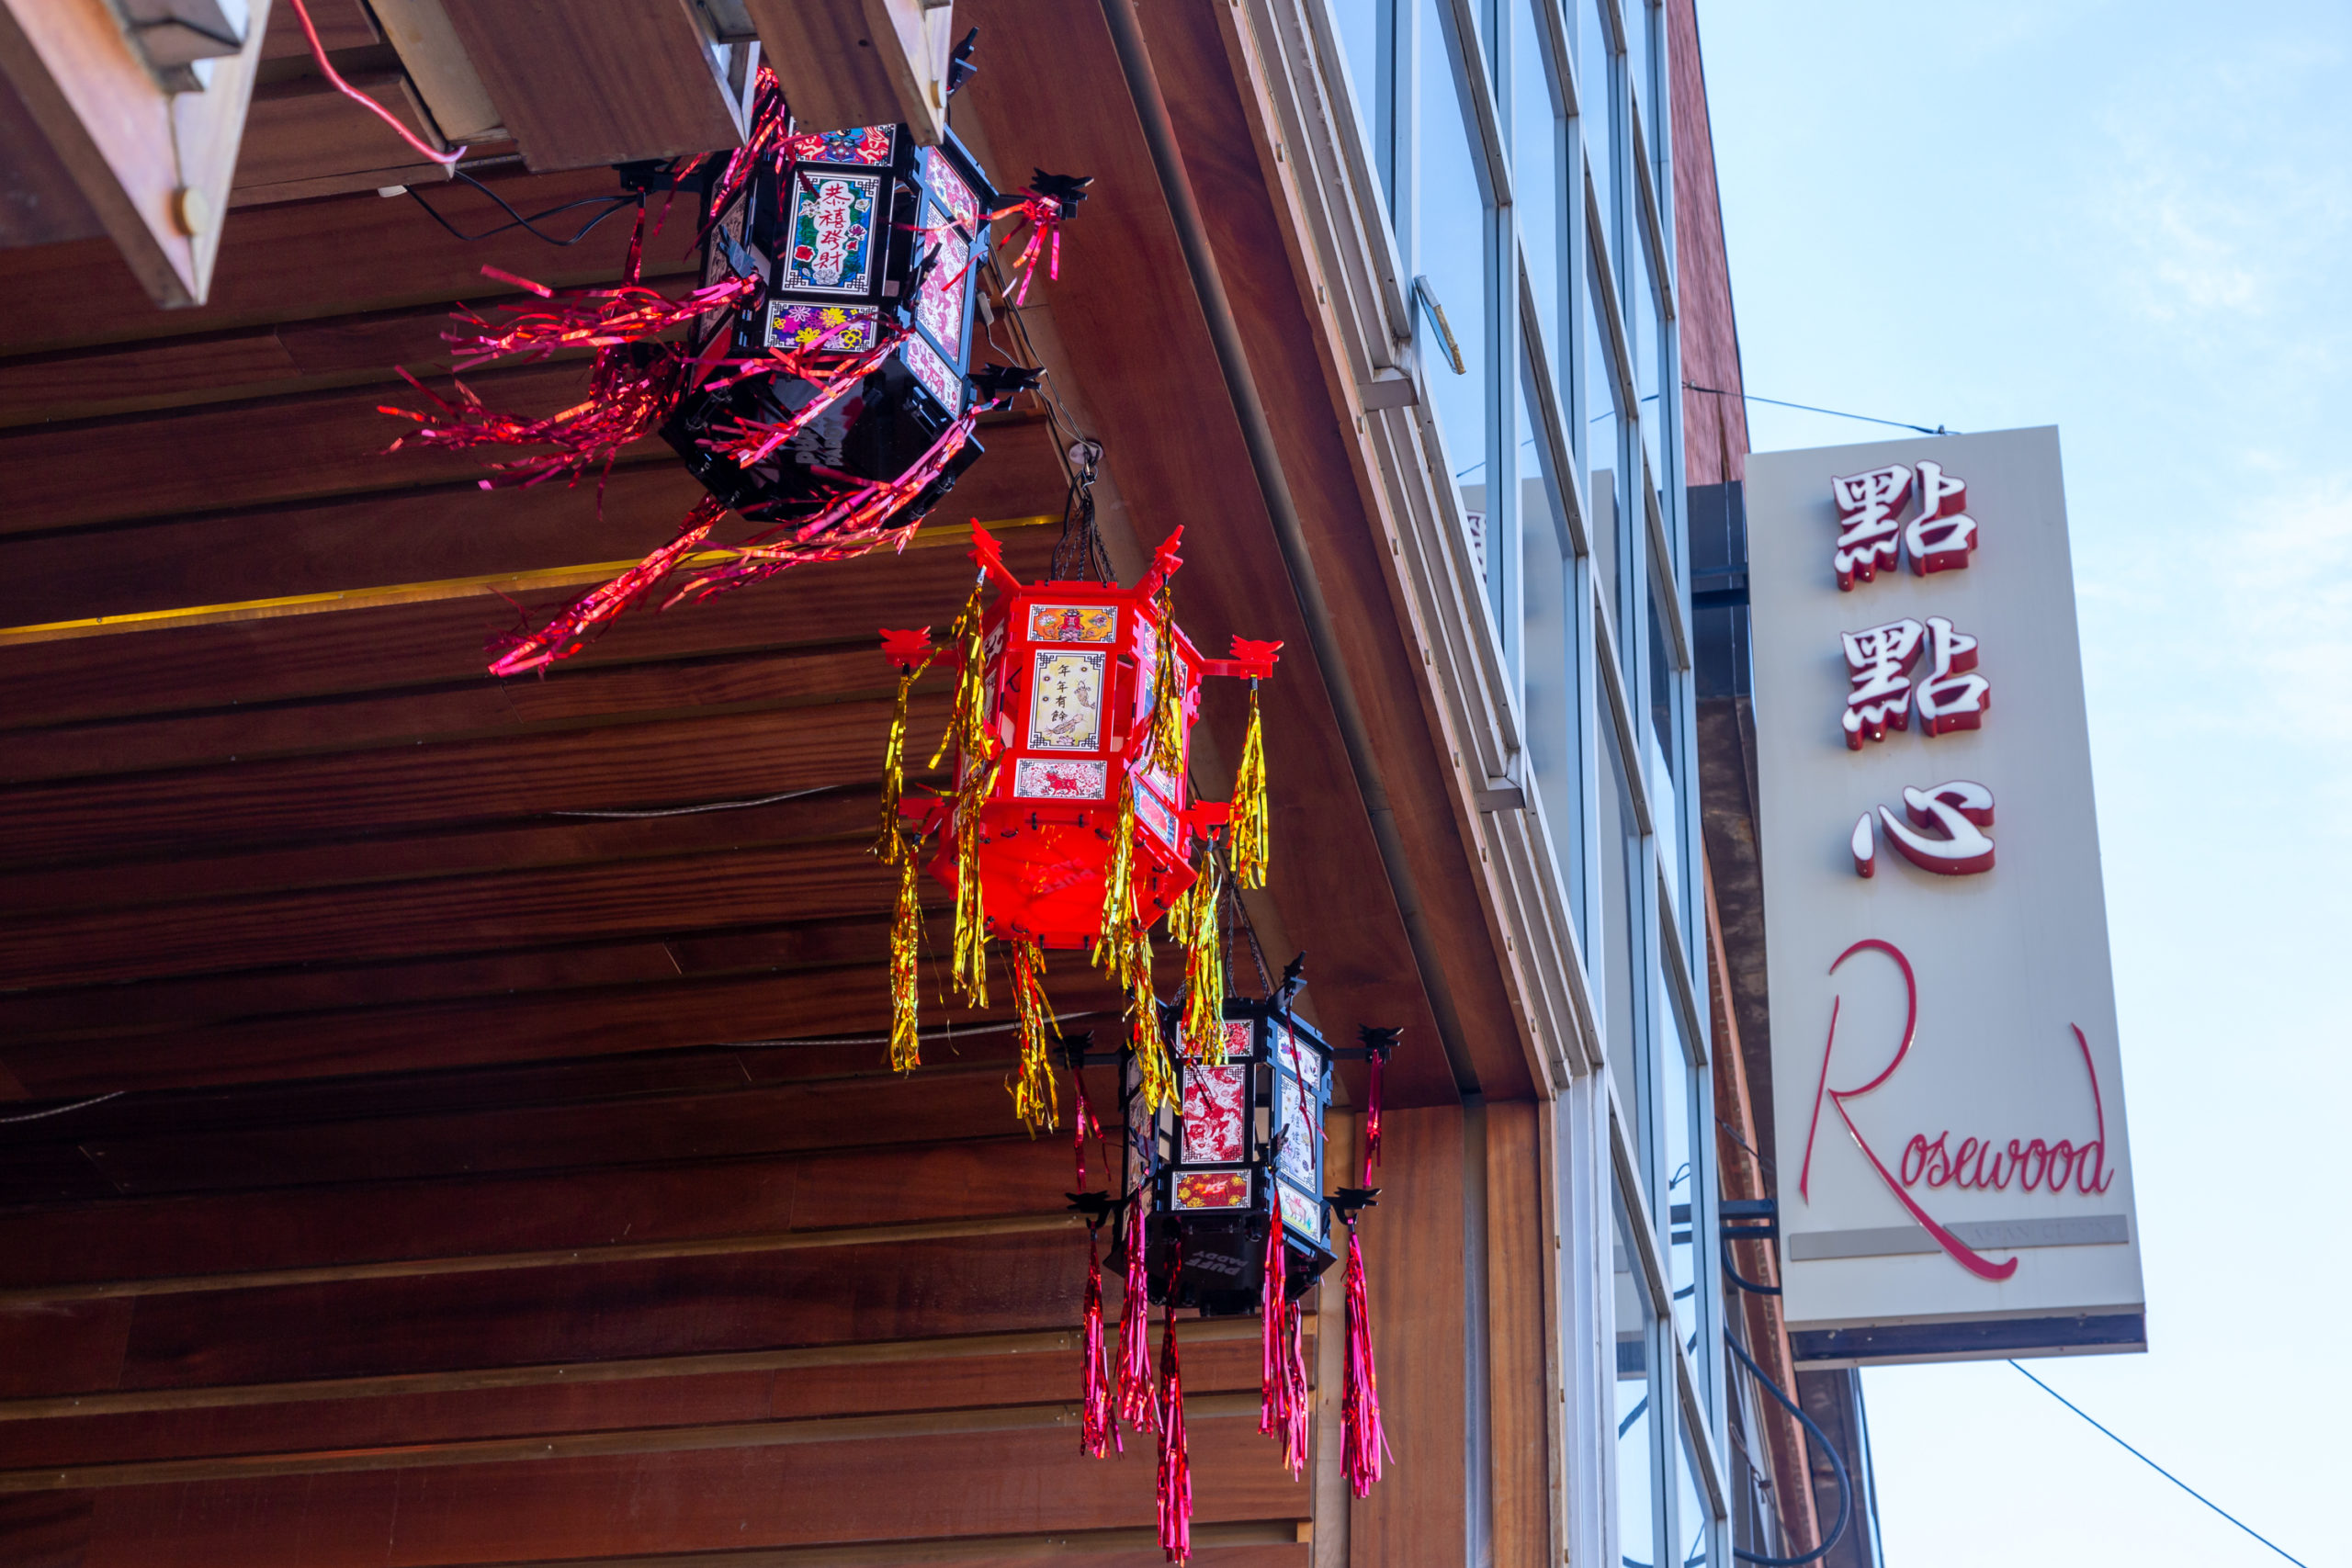 Vertical sign on the right that reads "點點心 Rosewood" in red text on a white background. Three hand-crafted lanterns, two black and one red, are seen on the left with their red and gold tassels blowing in the wind.